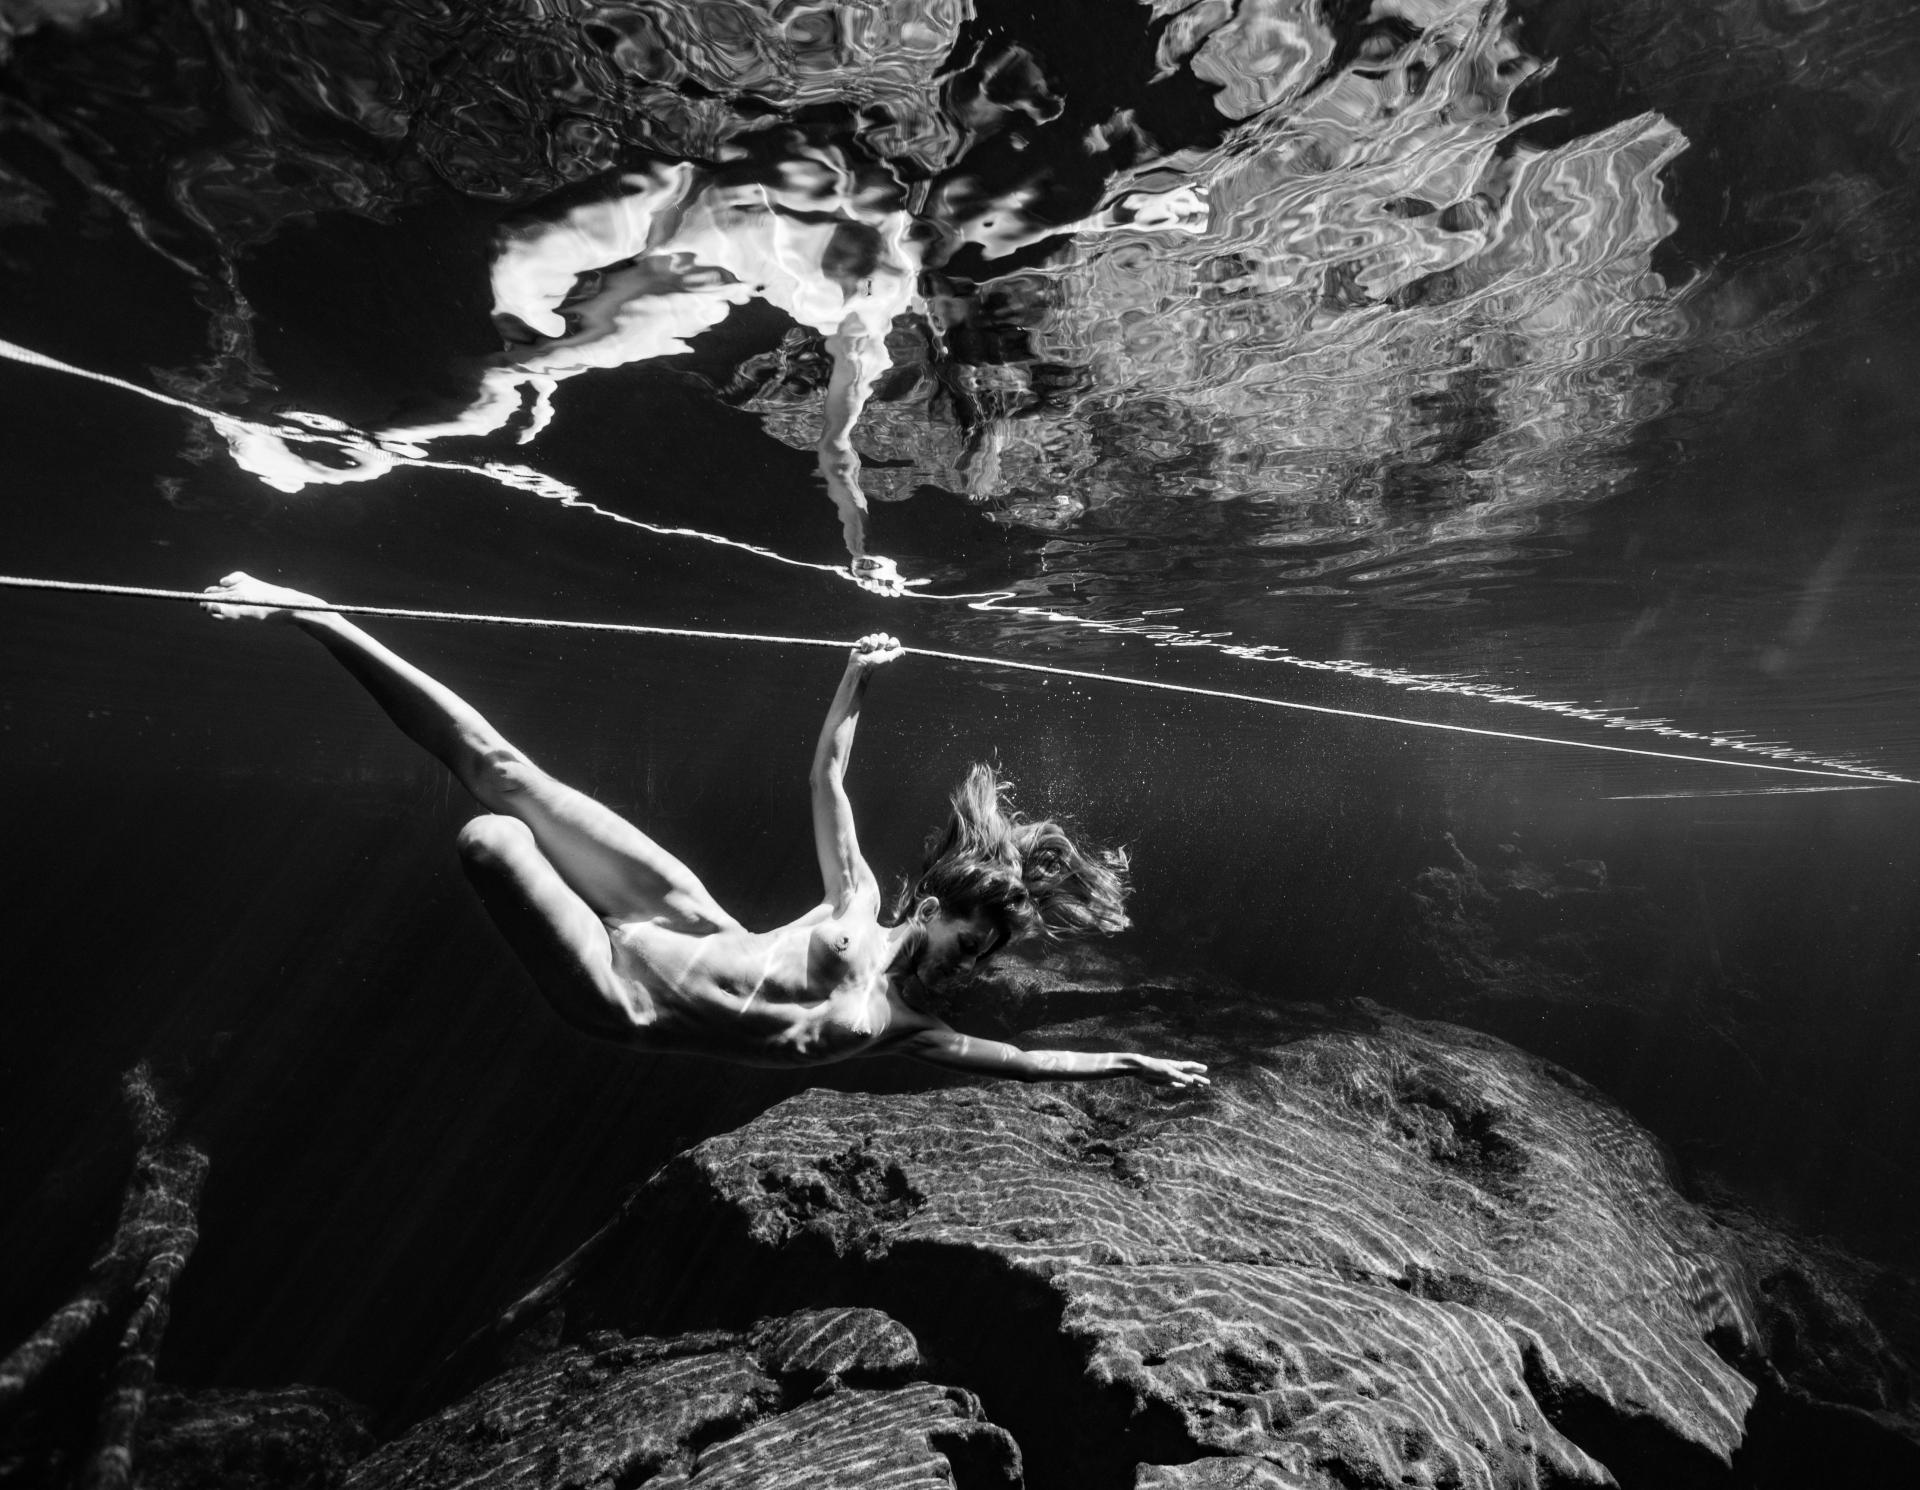 New York Photography Awards Winner - The Tightrope Dancer